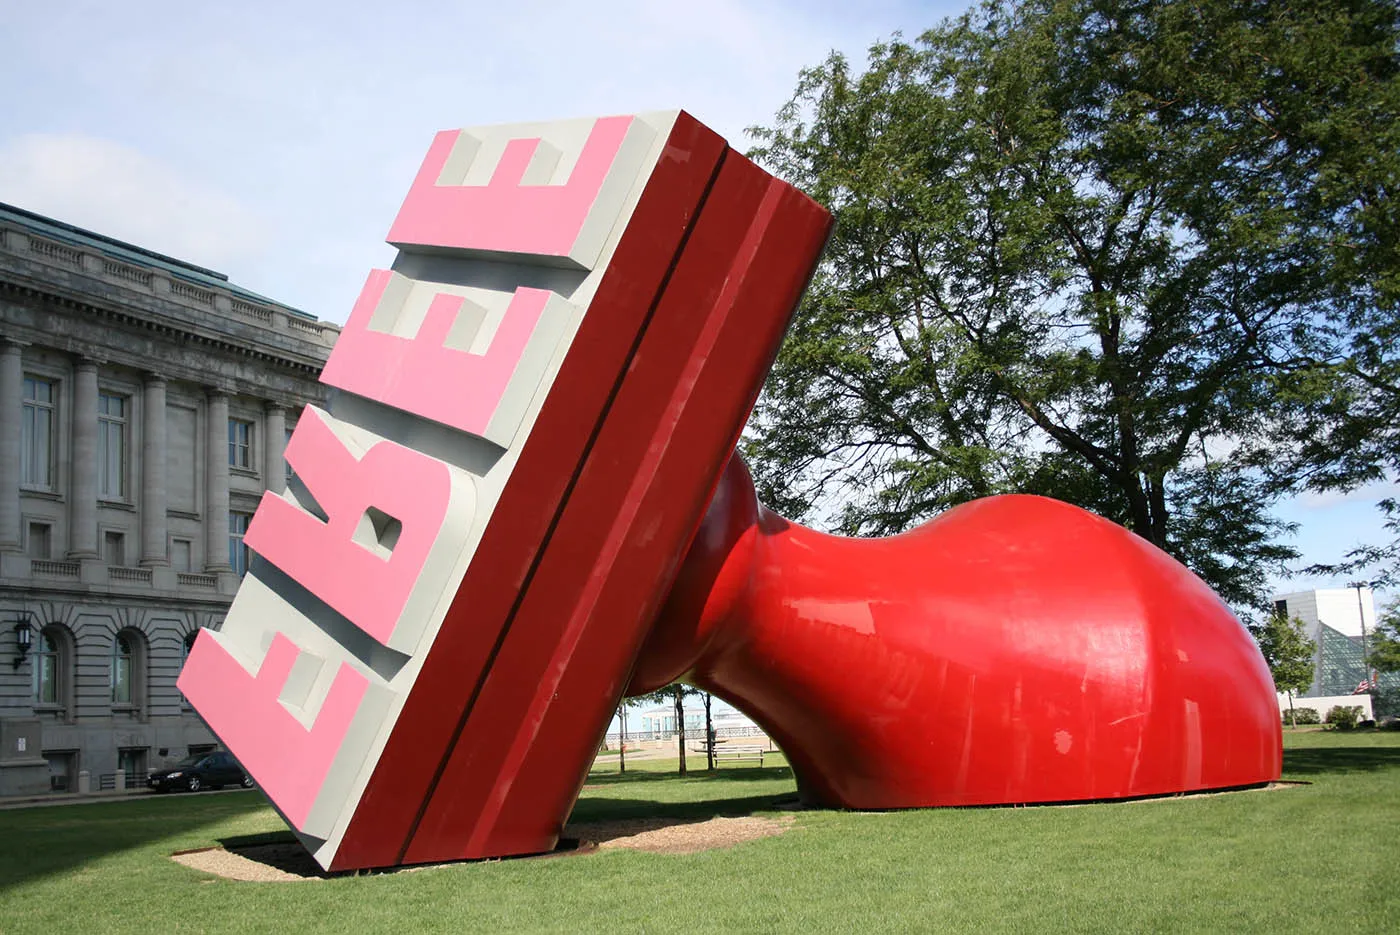 World's Largest Rubber Stamp (FREE Stamp) in Cleveland, Ohio